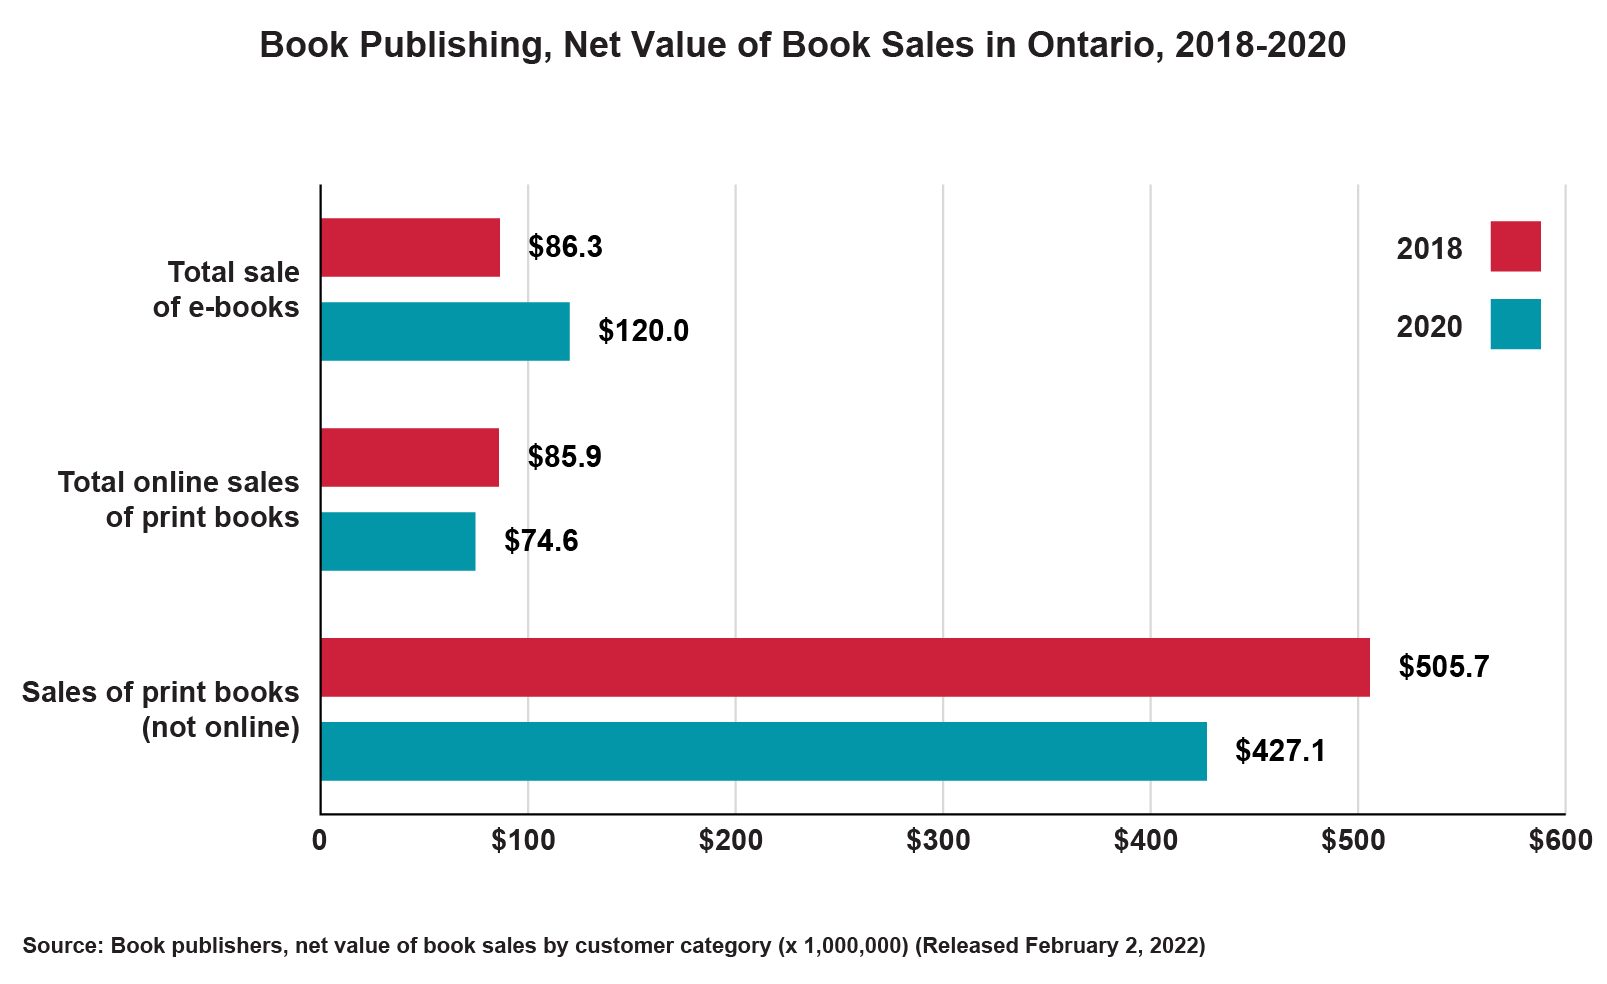 A horizontal bar chart showing the net value of book sales in Ontario, with data from both 2018 and 2020. The sale of print books in-person (not online) remains the most significant source of sales revenue. However, the total sales of ebooks in 2020 has exceeded what was sold in 2018.